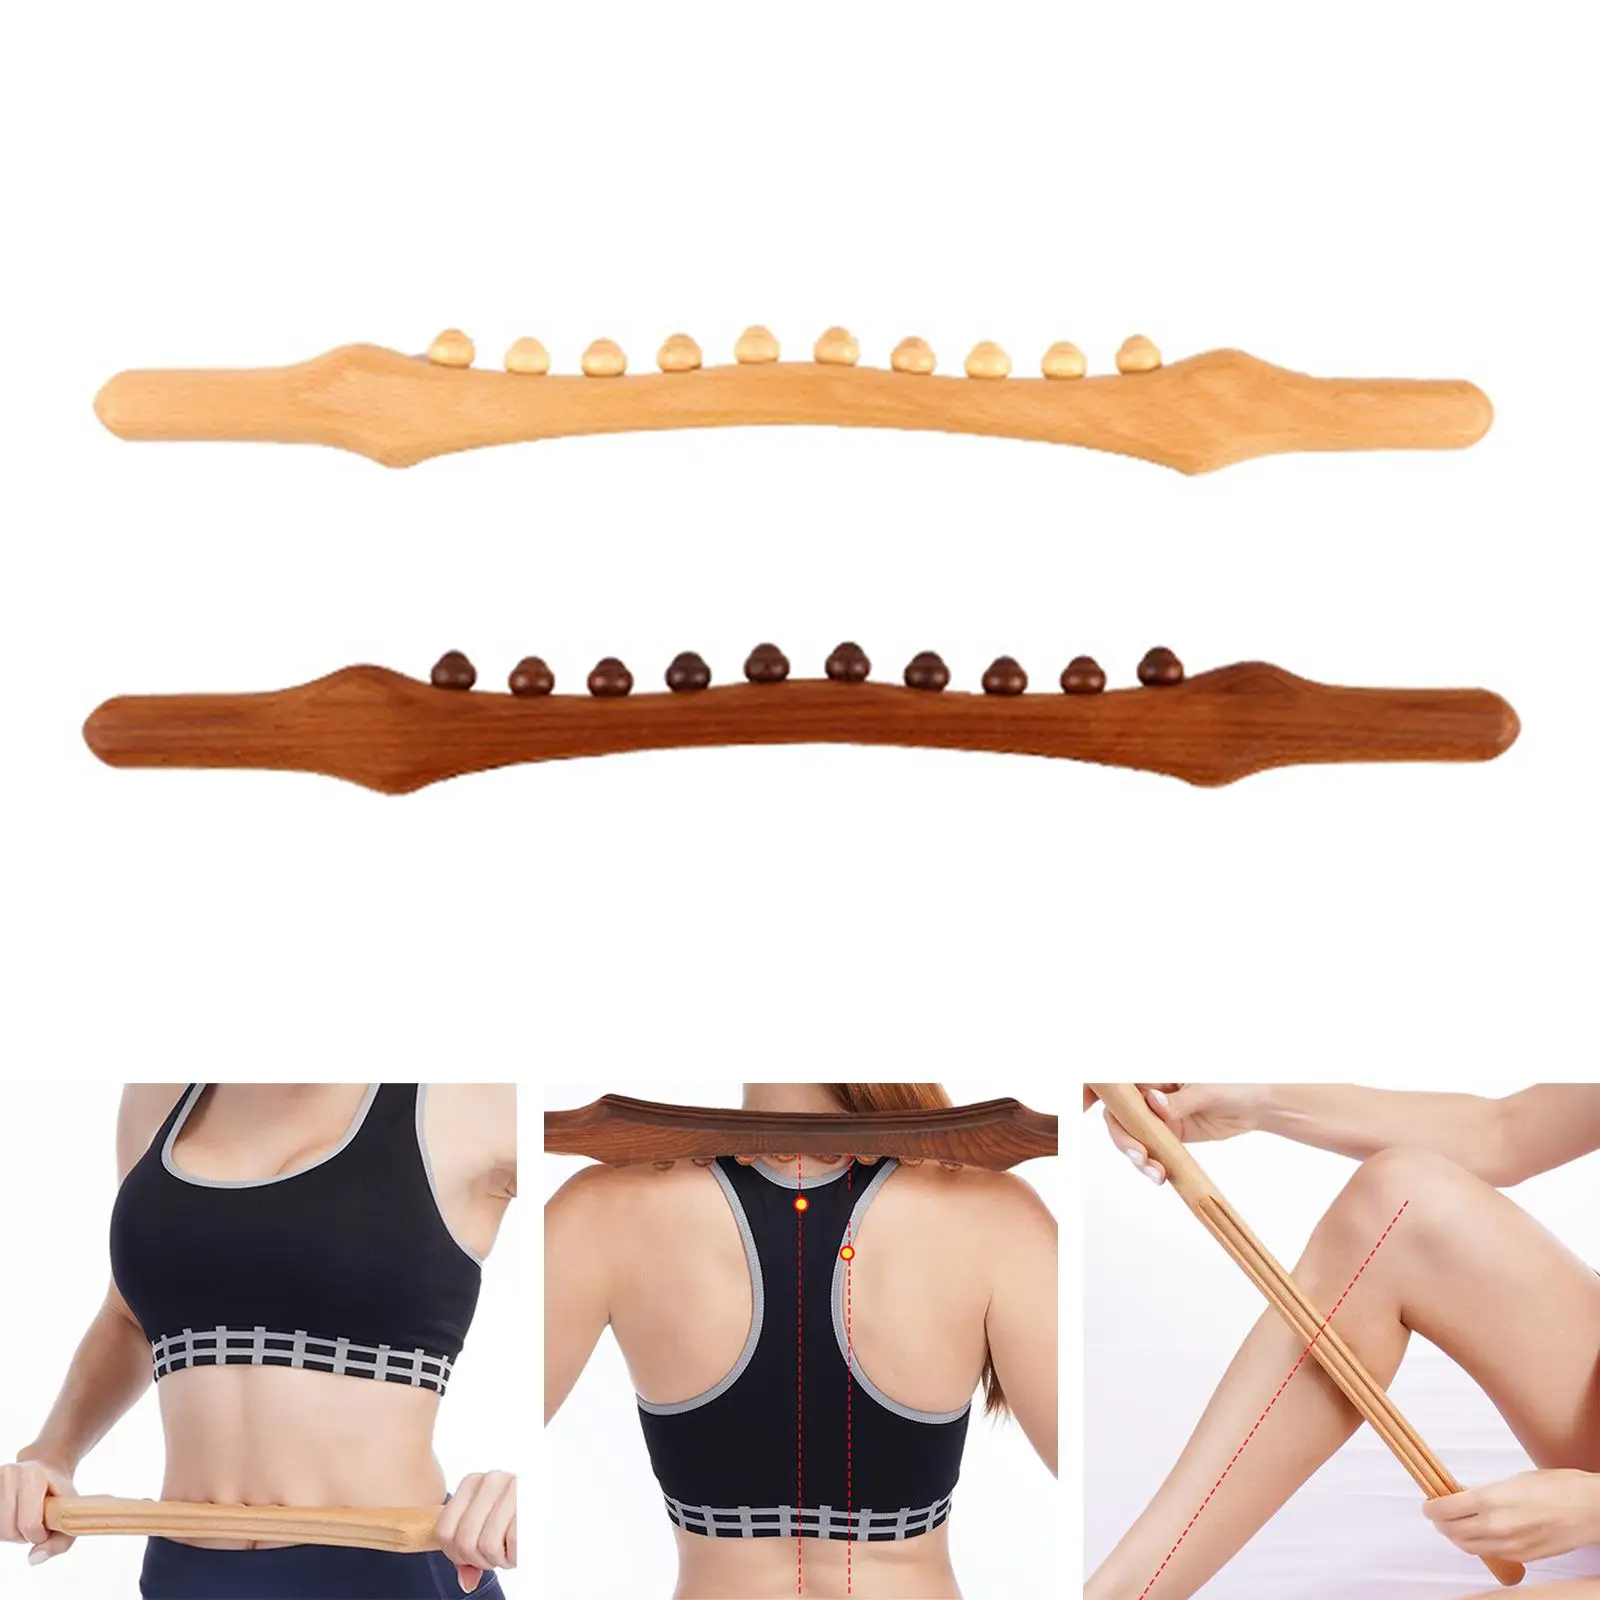 Wooden Guasha Scraping Stick Massage Tools 10 Beads Anti Cellulite Muscle Relaxation Body Meridian Massager Wand for Waist Legs